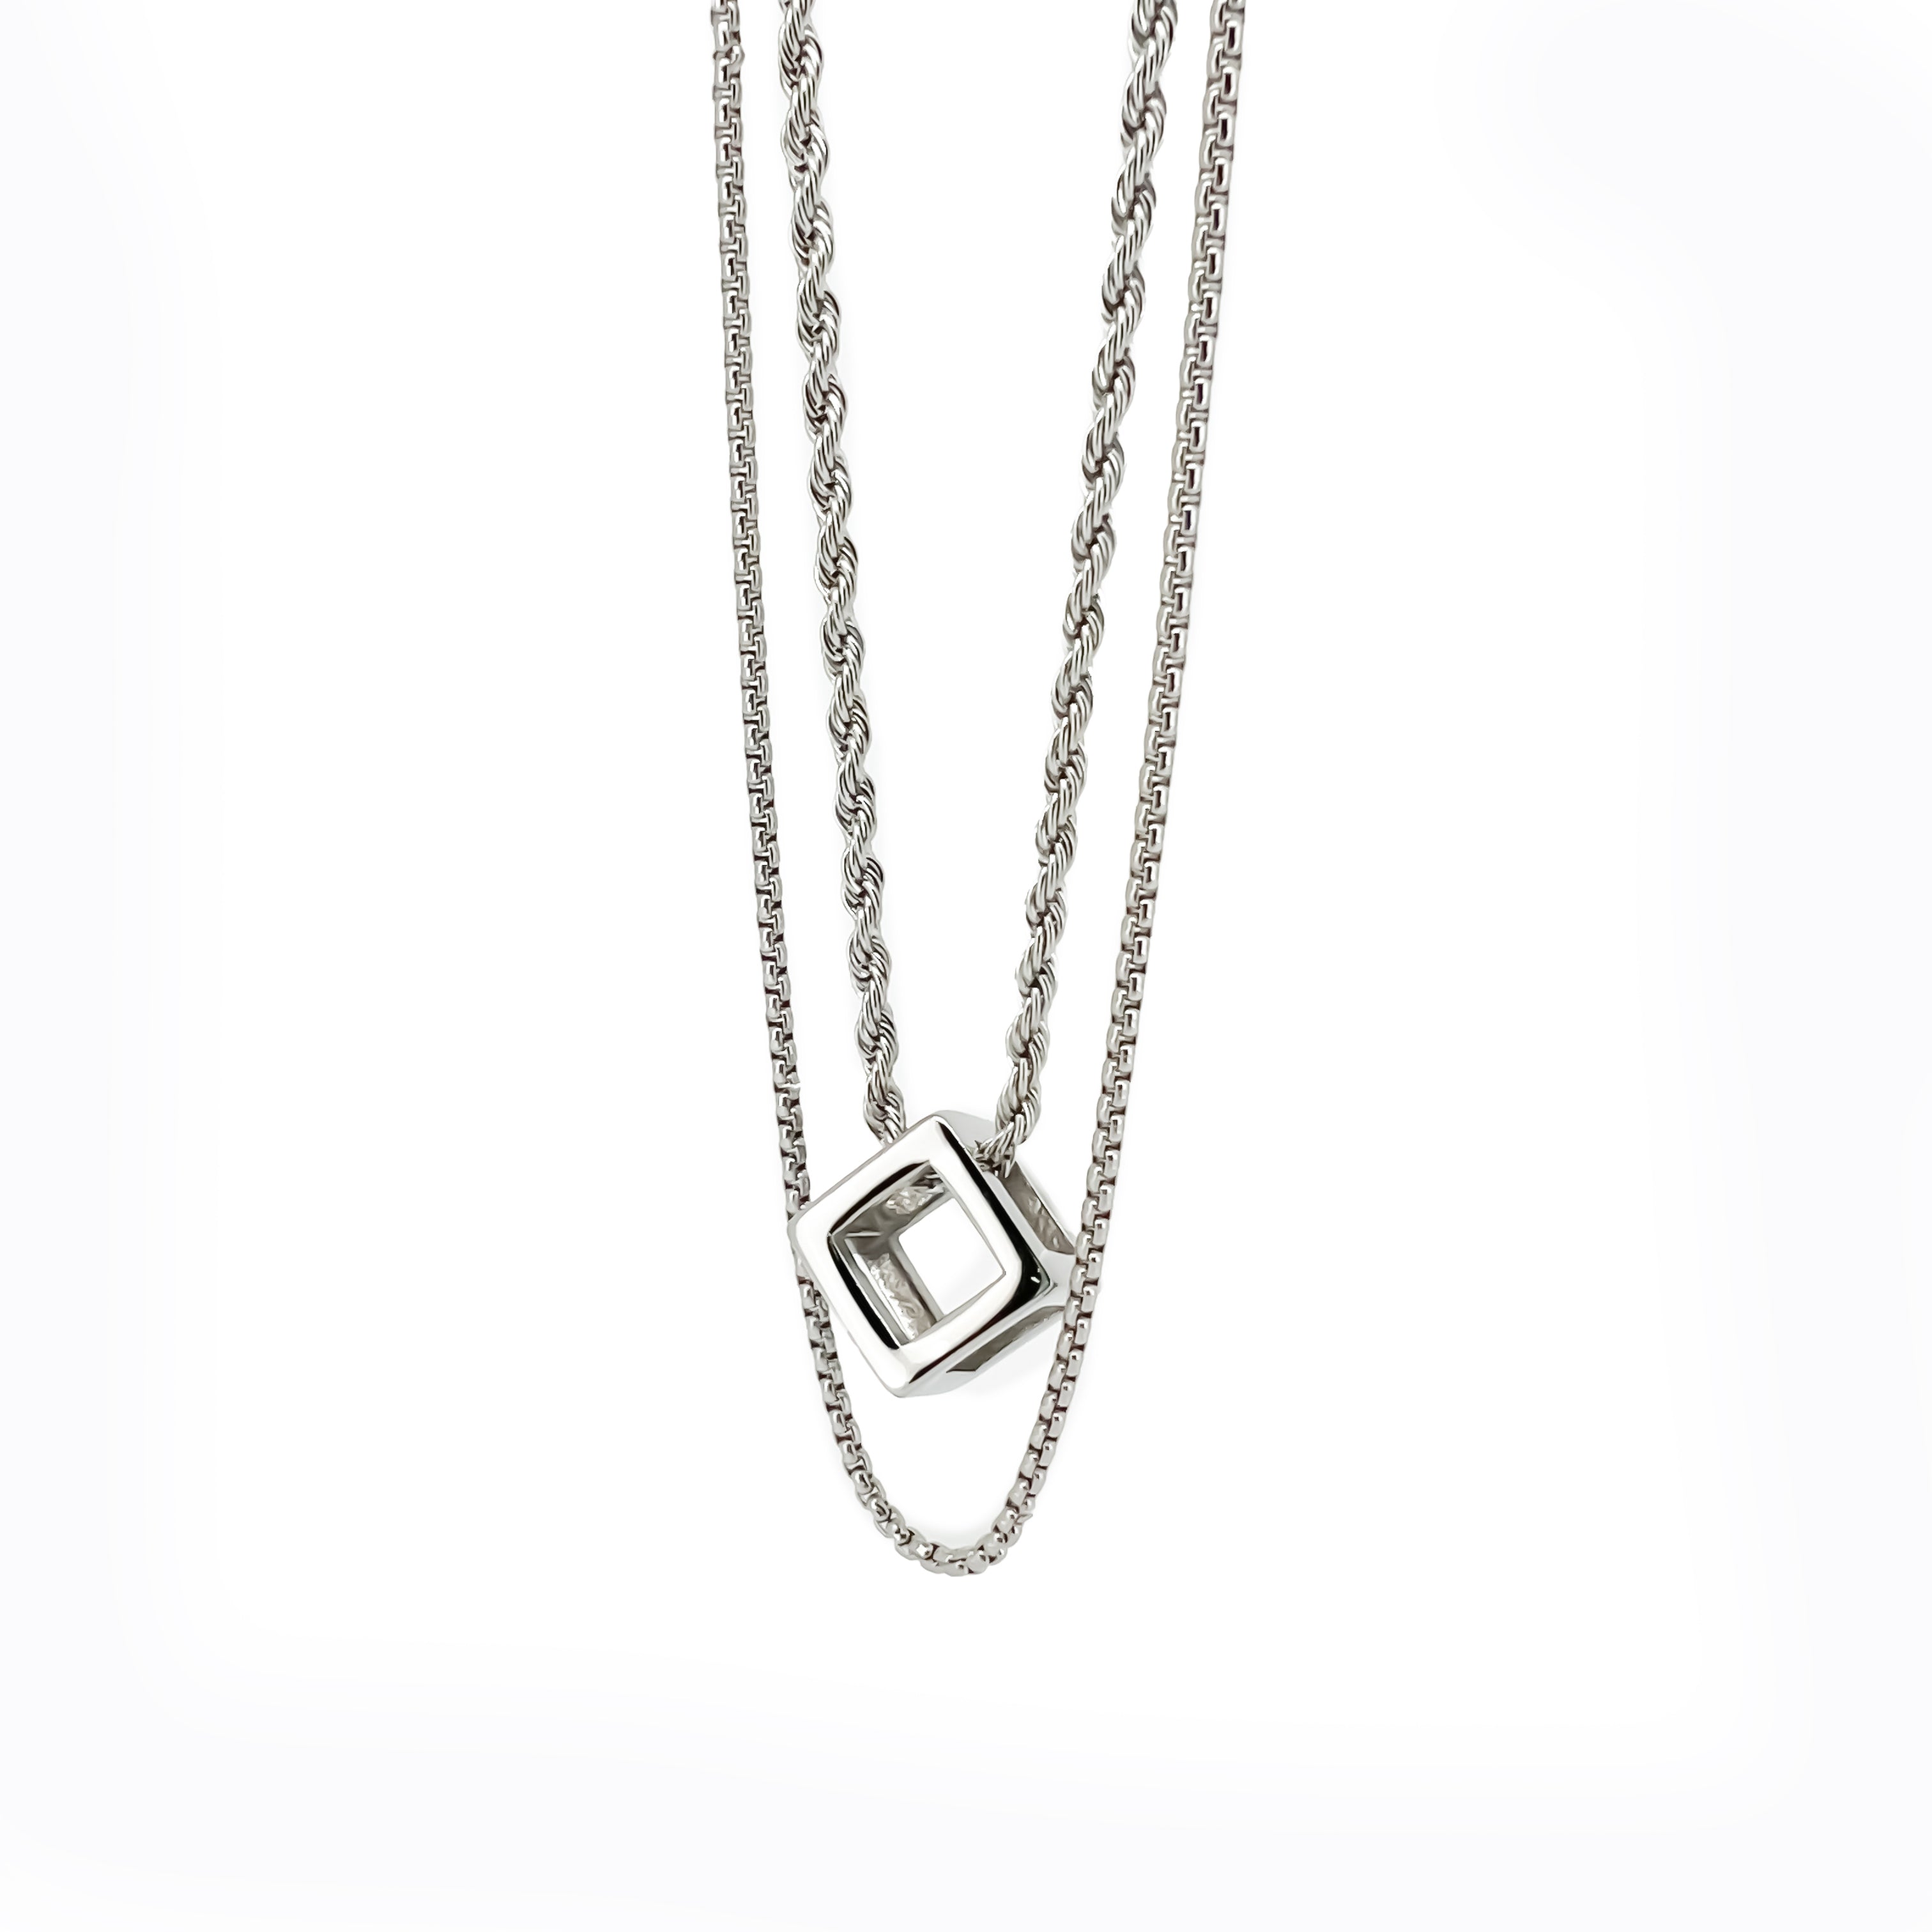 Mattis Stainless Steel Necklace with Geometric Square Pendant